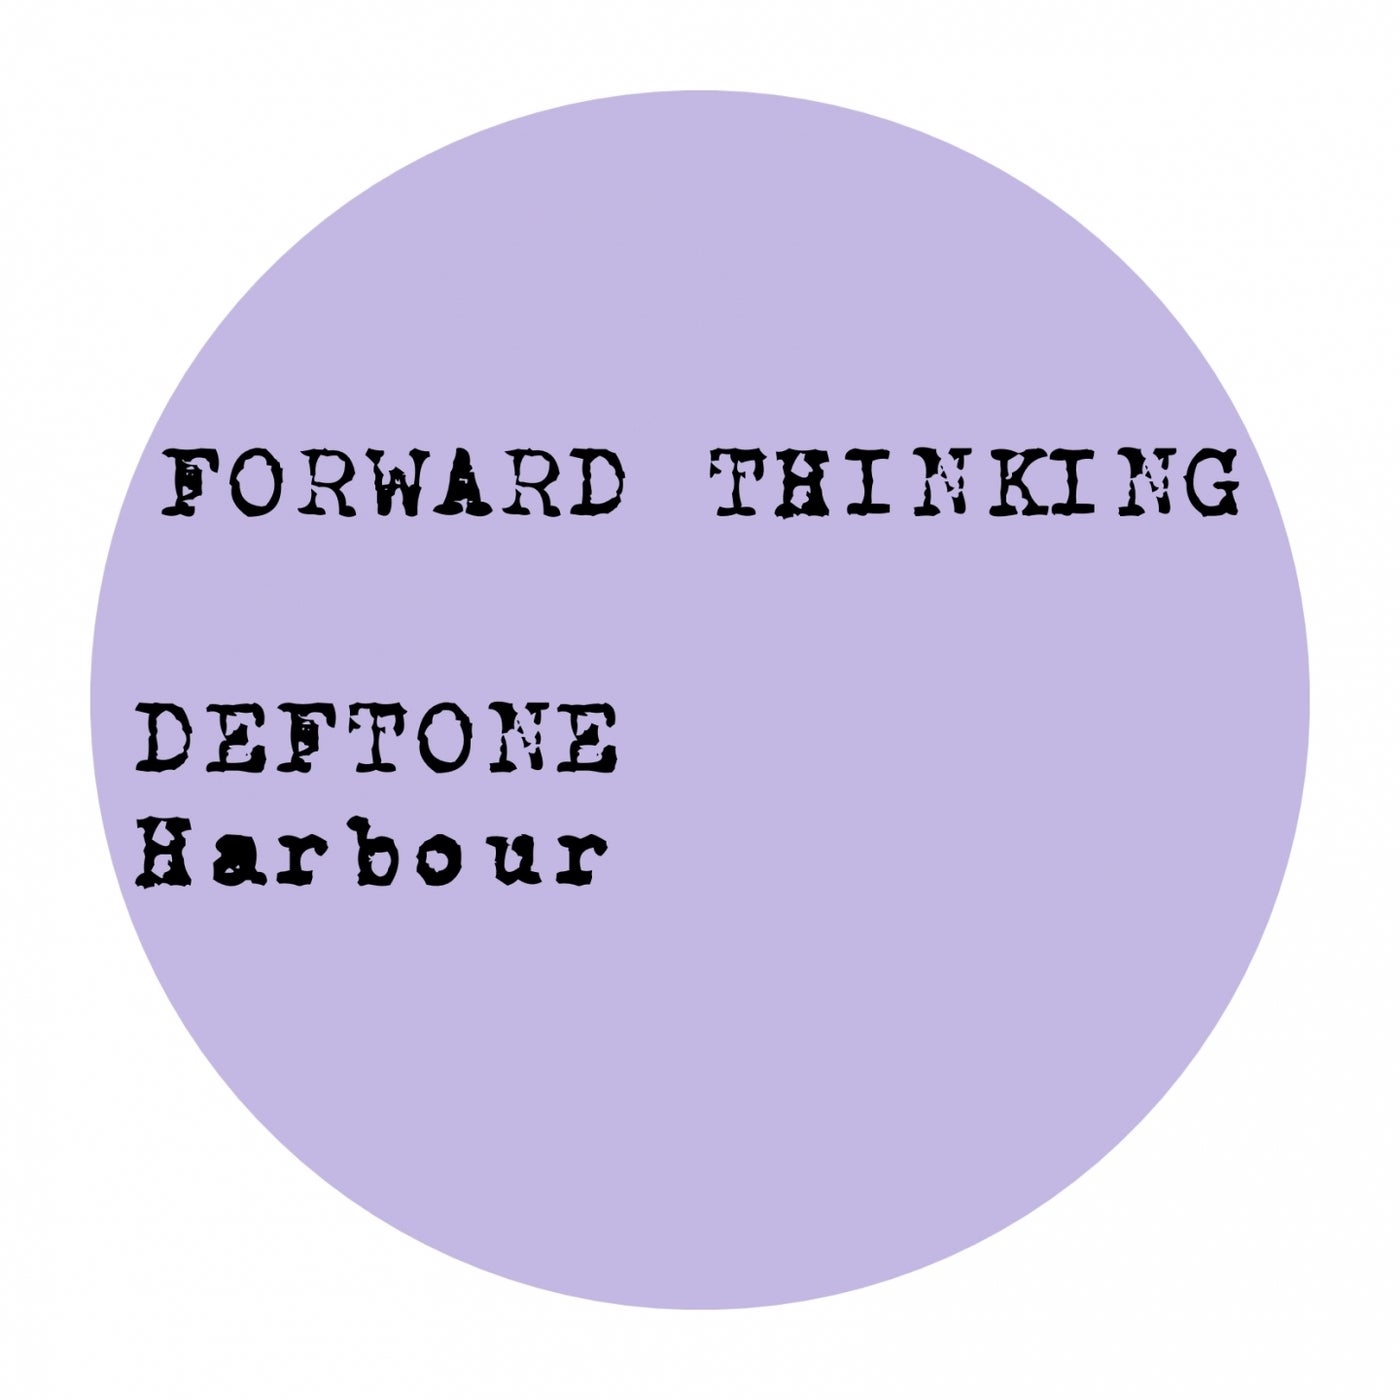 Deftone - Love and Happiness (Original Mix).mp3. Thinking ahead